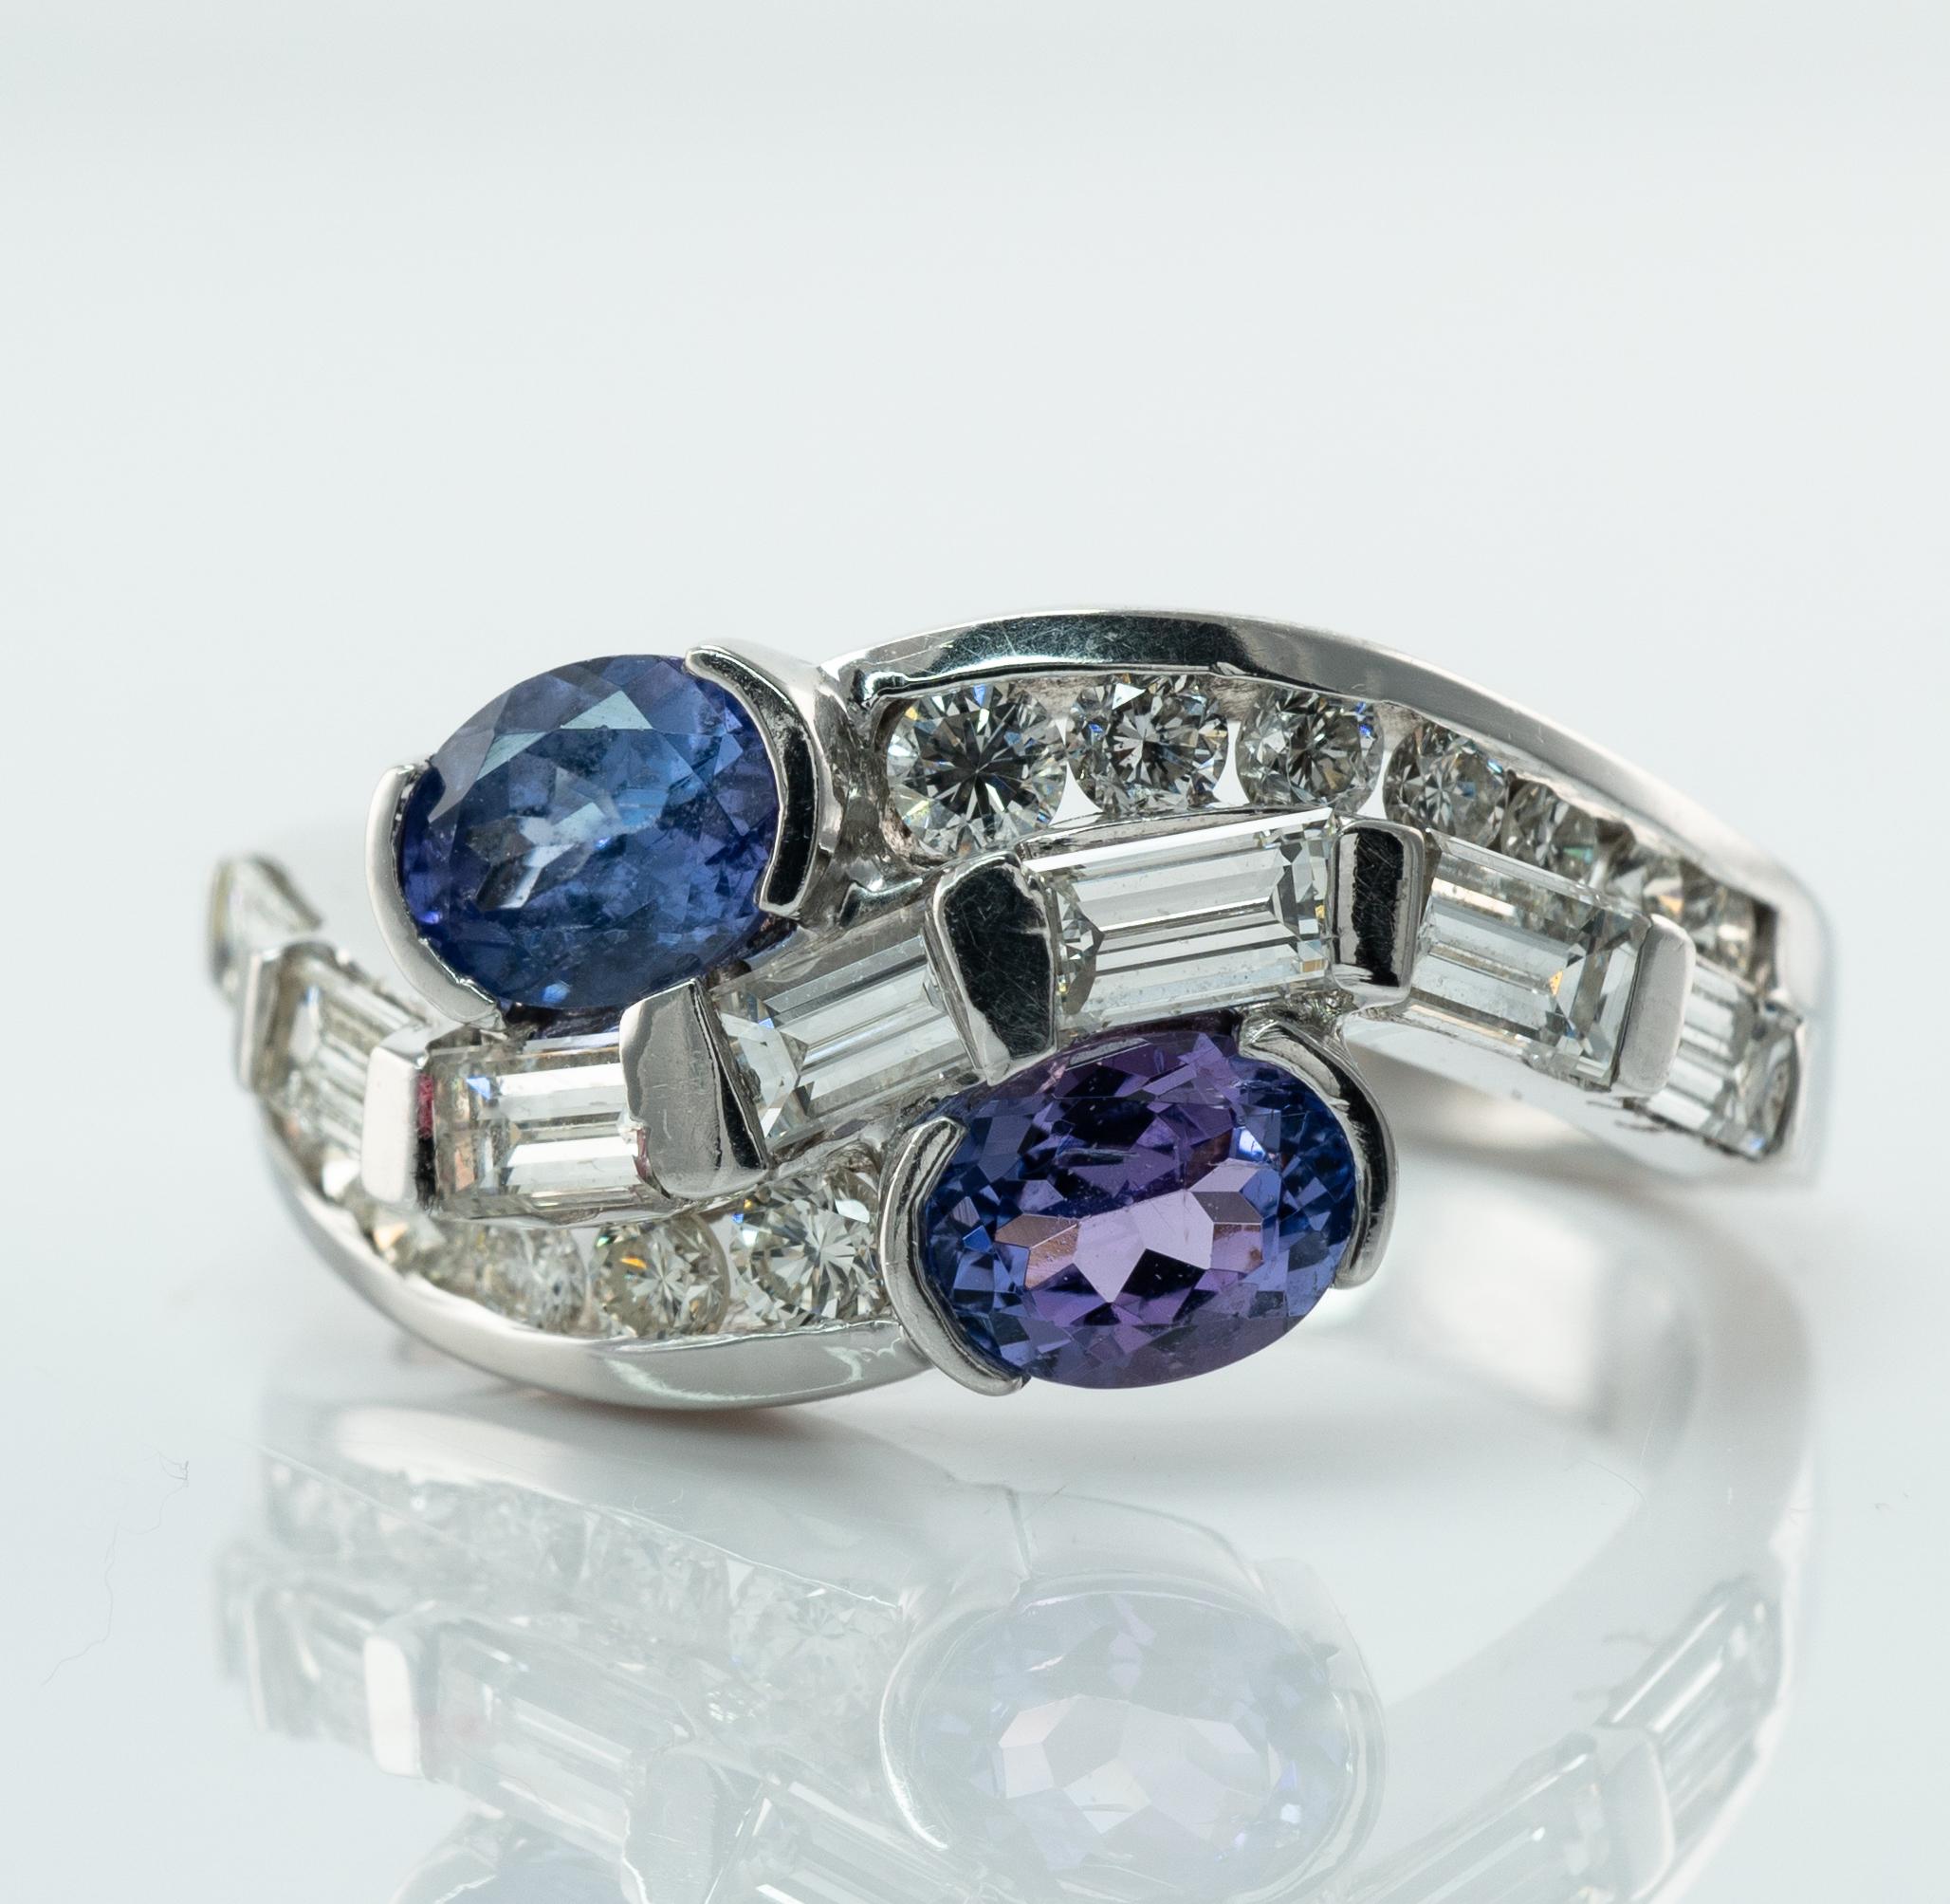 Natural Diamond Tanzanite Ring Band 14K White Gold

This beautiful estate ring is finely crafted in solid 14K White gold and set with genuine Earth mined Tanzanites and diamonds.
Two oval Tanzanites measure 5x4mm (about .40ct each) = .80 carat.
They